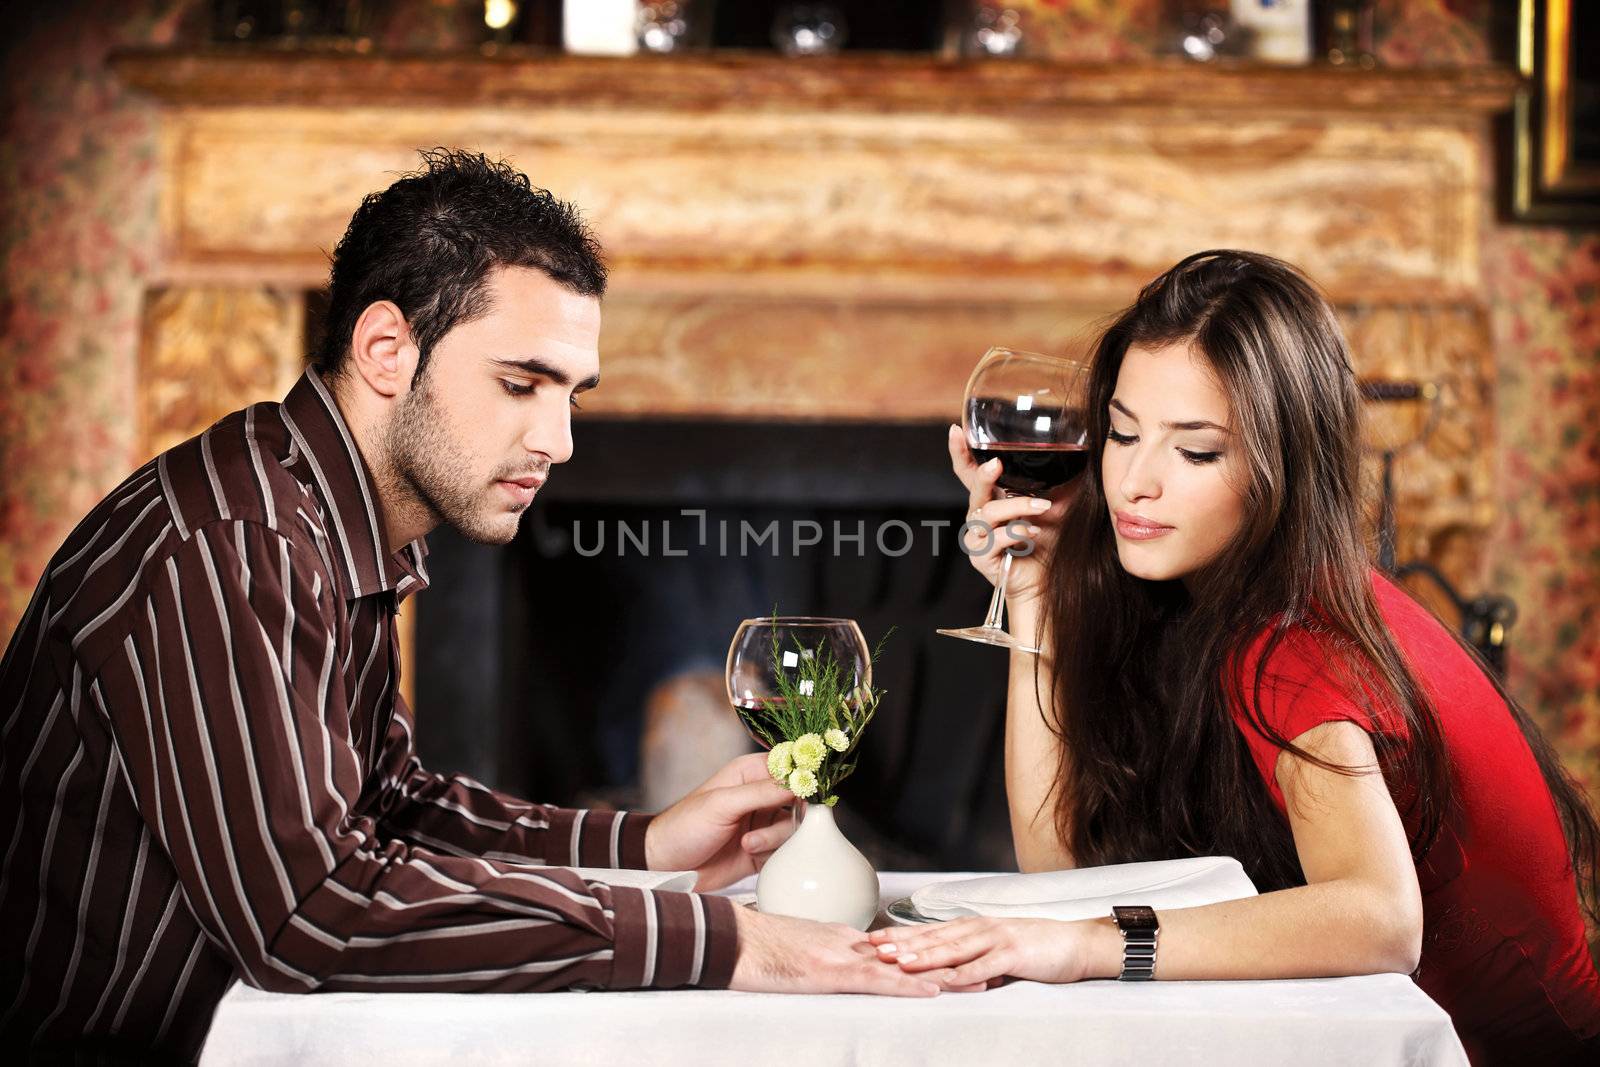 She hold his hand while they sitting at table and drinking wine near fireplace, focus on male